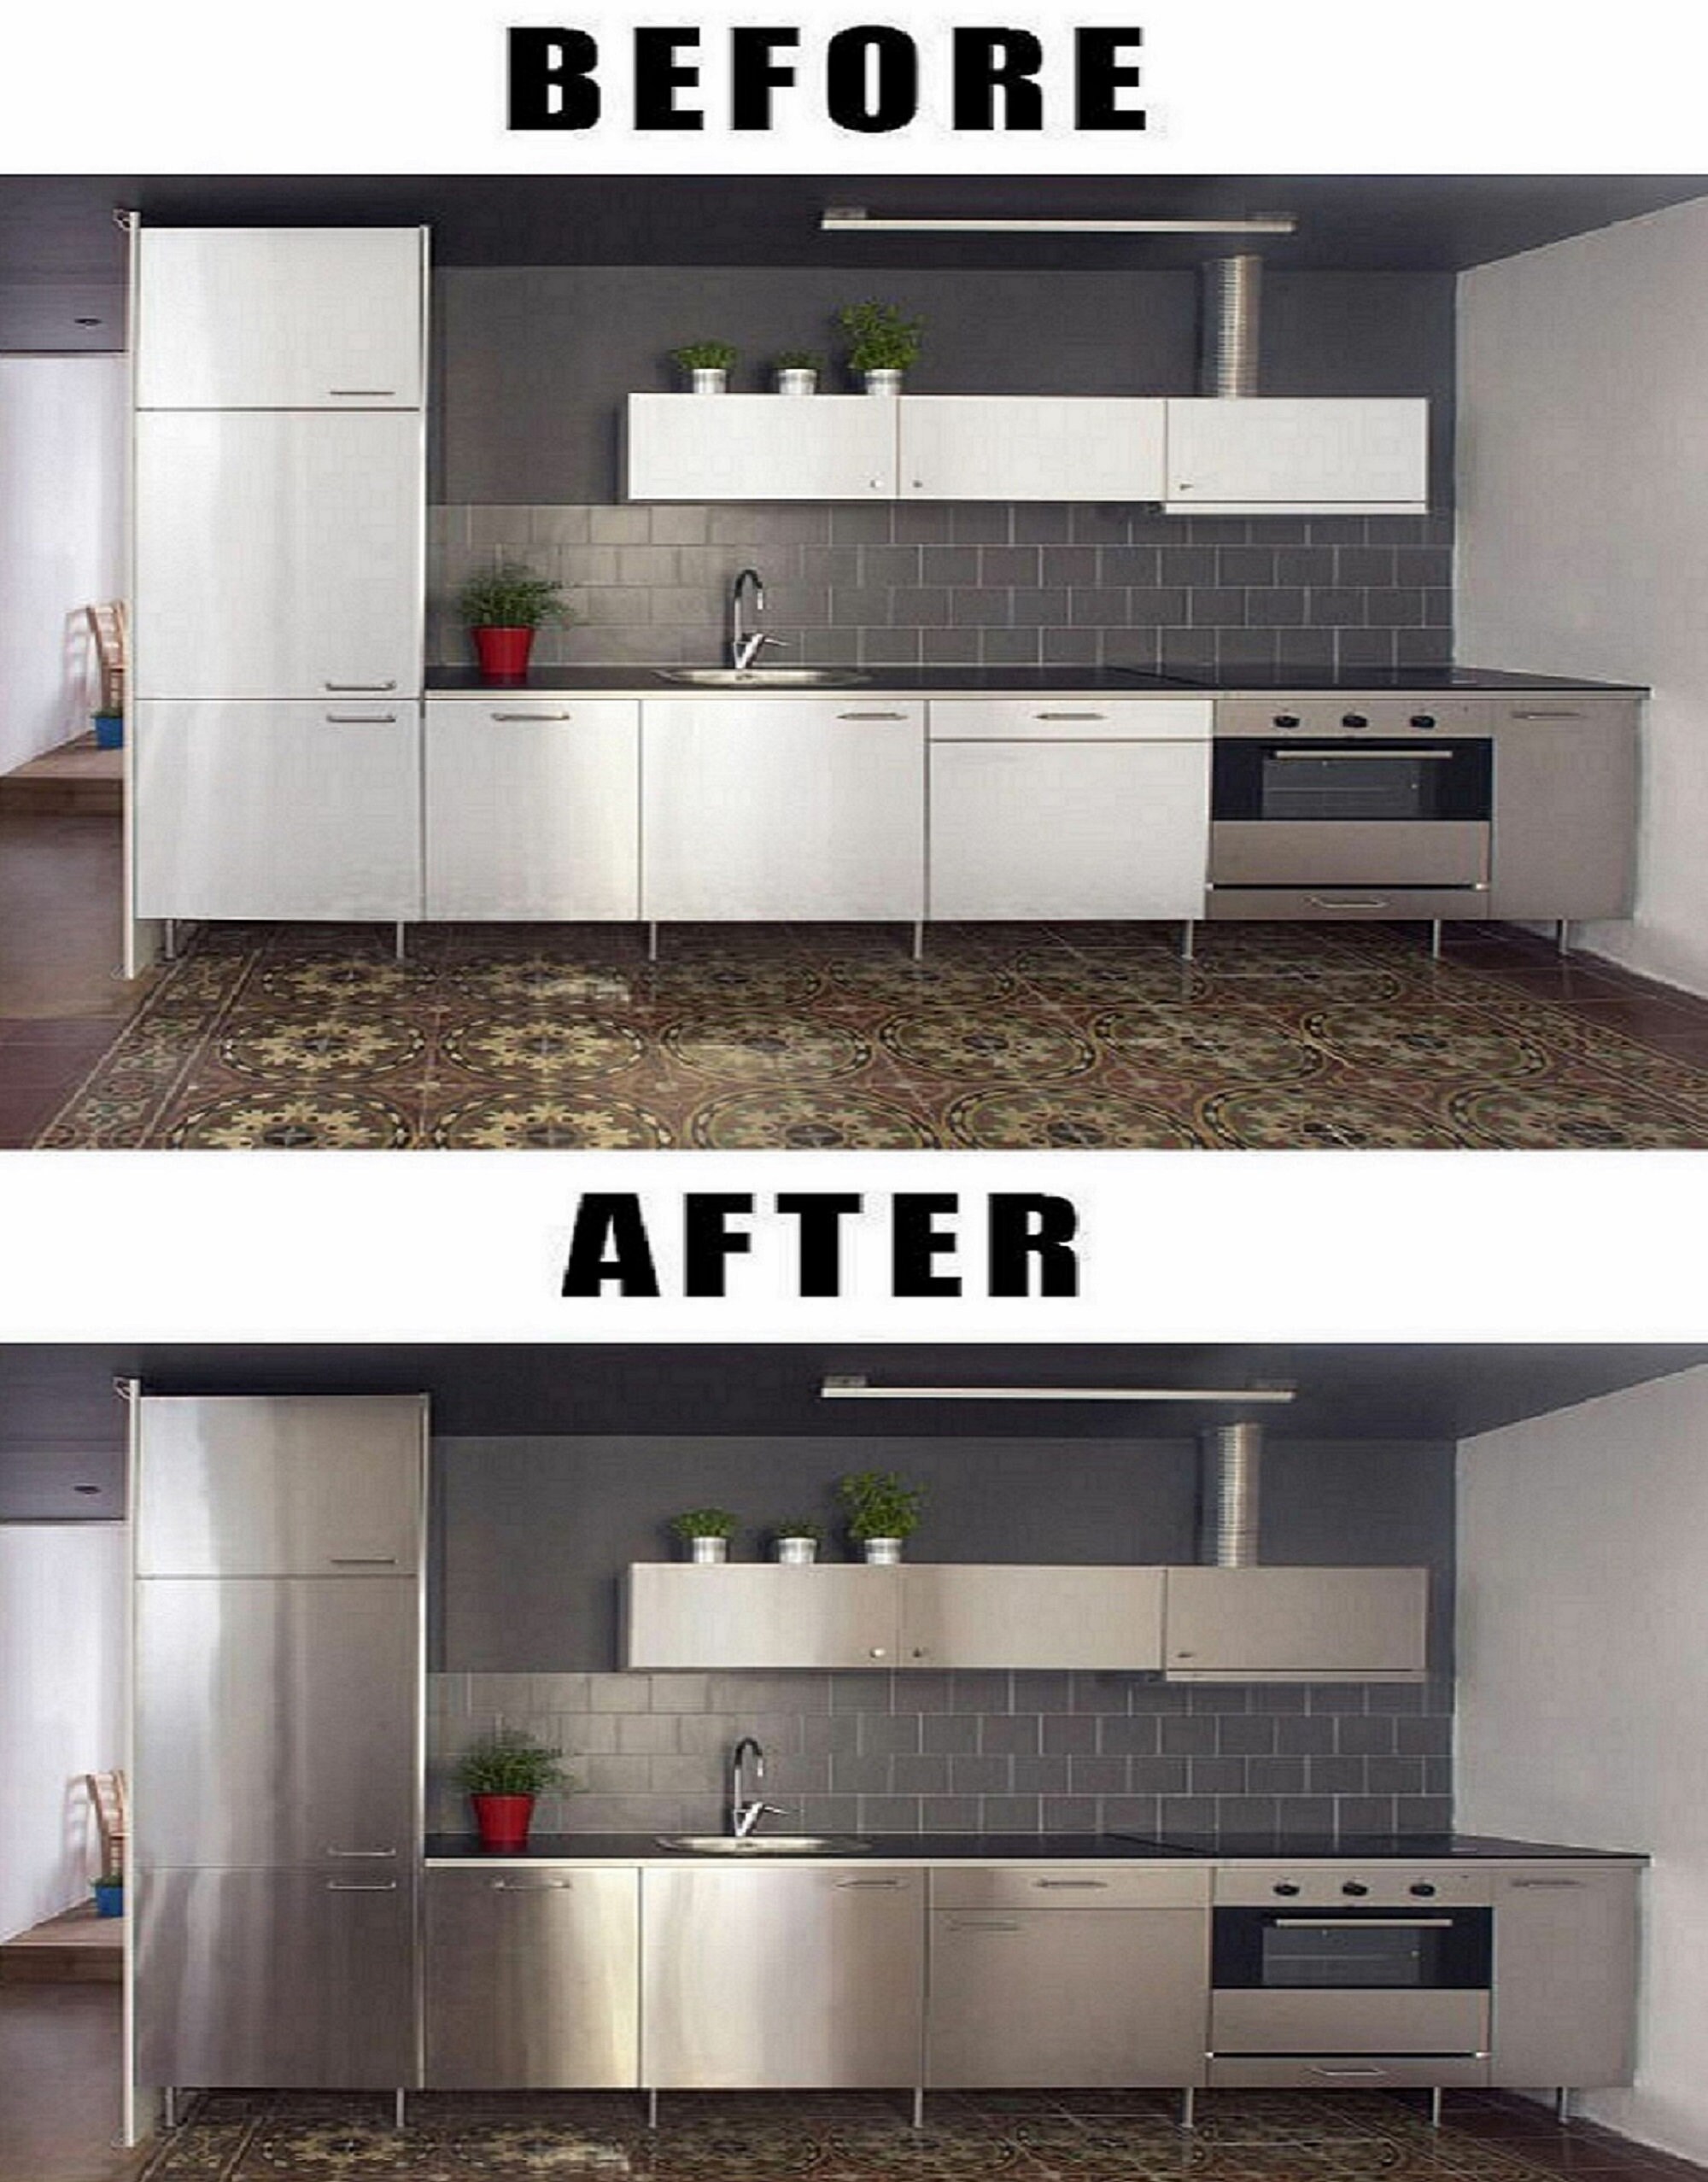 Stainless Steel Contact Paper Dishwasher Makeover - HomeHacks